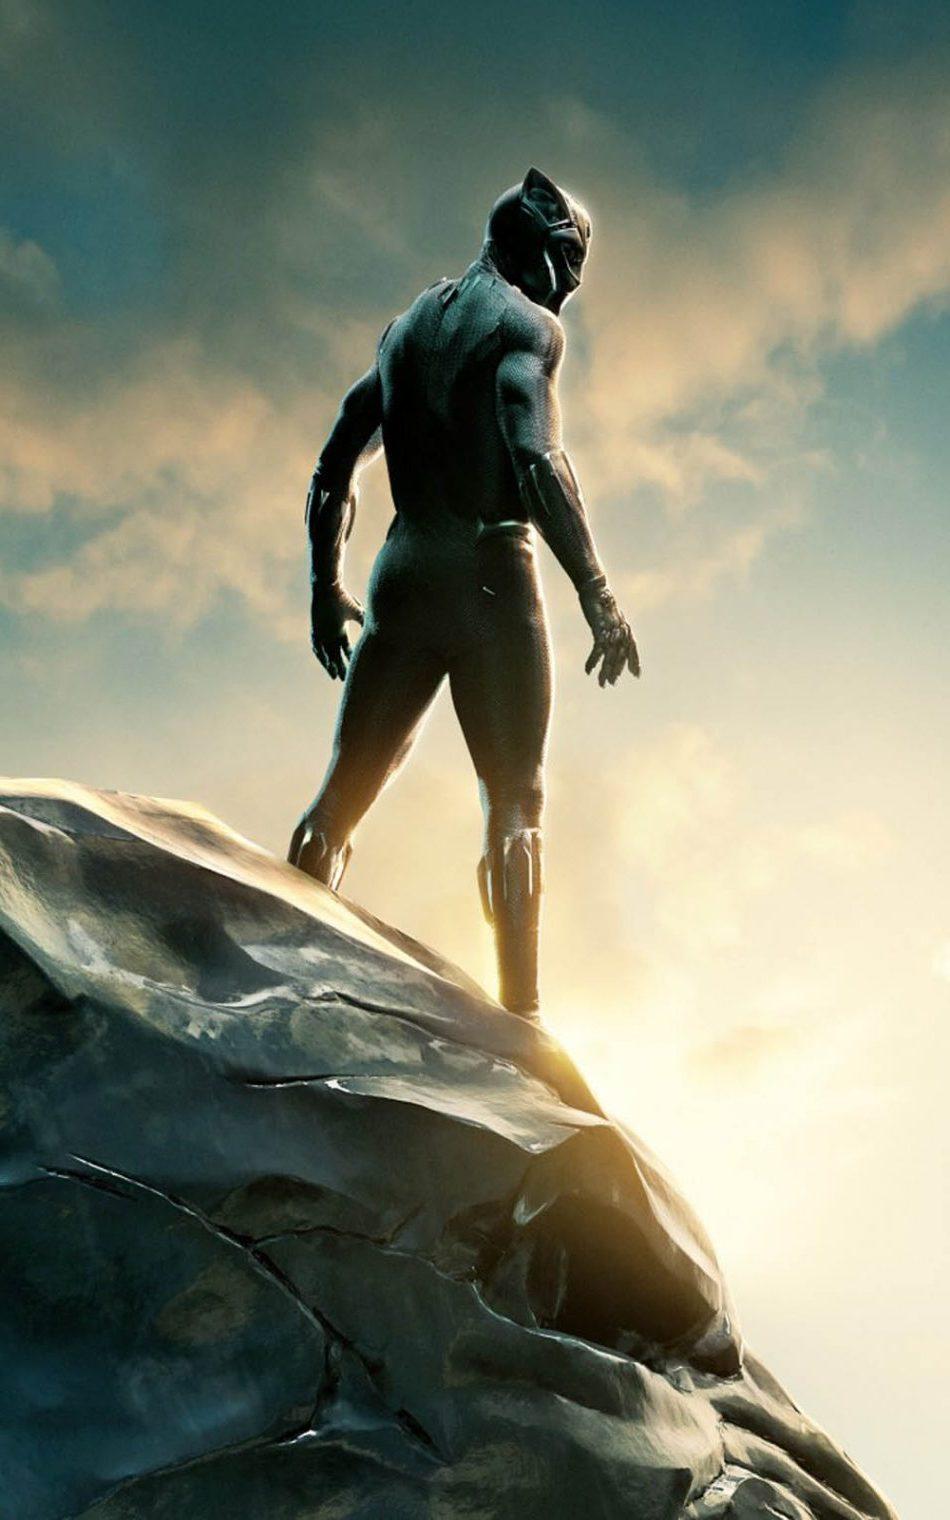 Black Panther Movie Wallpaper iPhone 3D iPhone Wallpaper